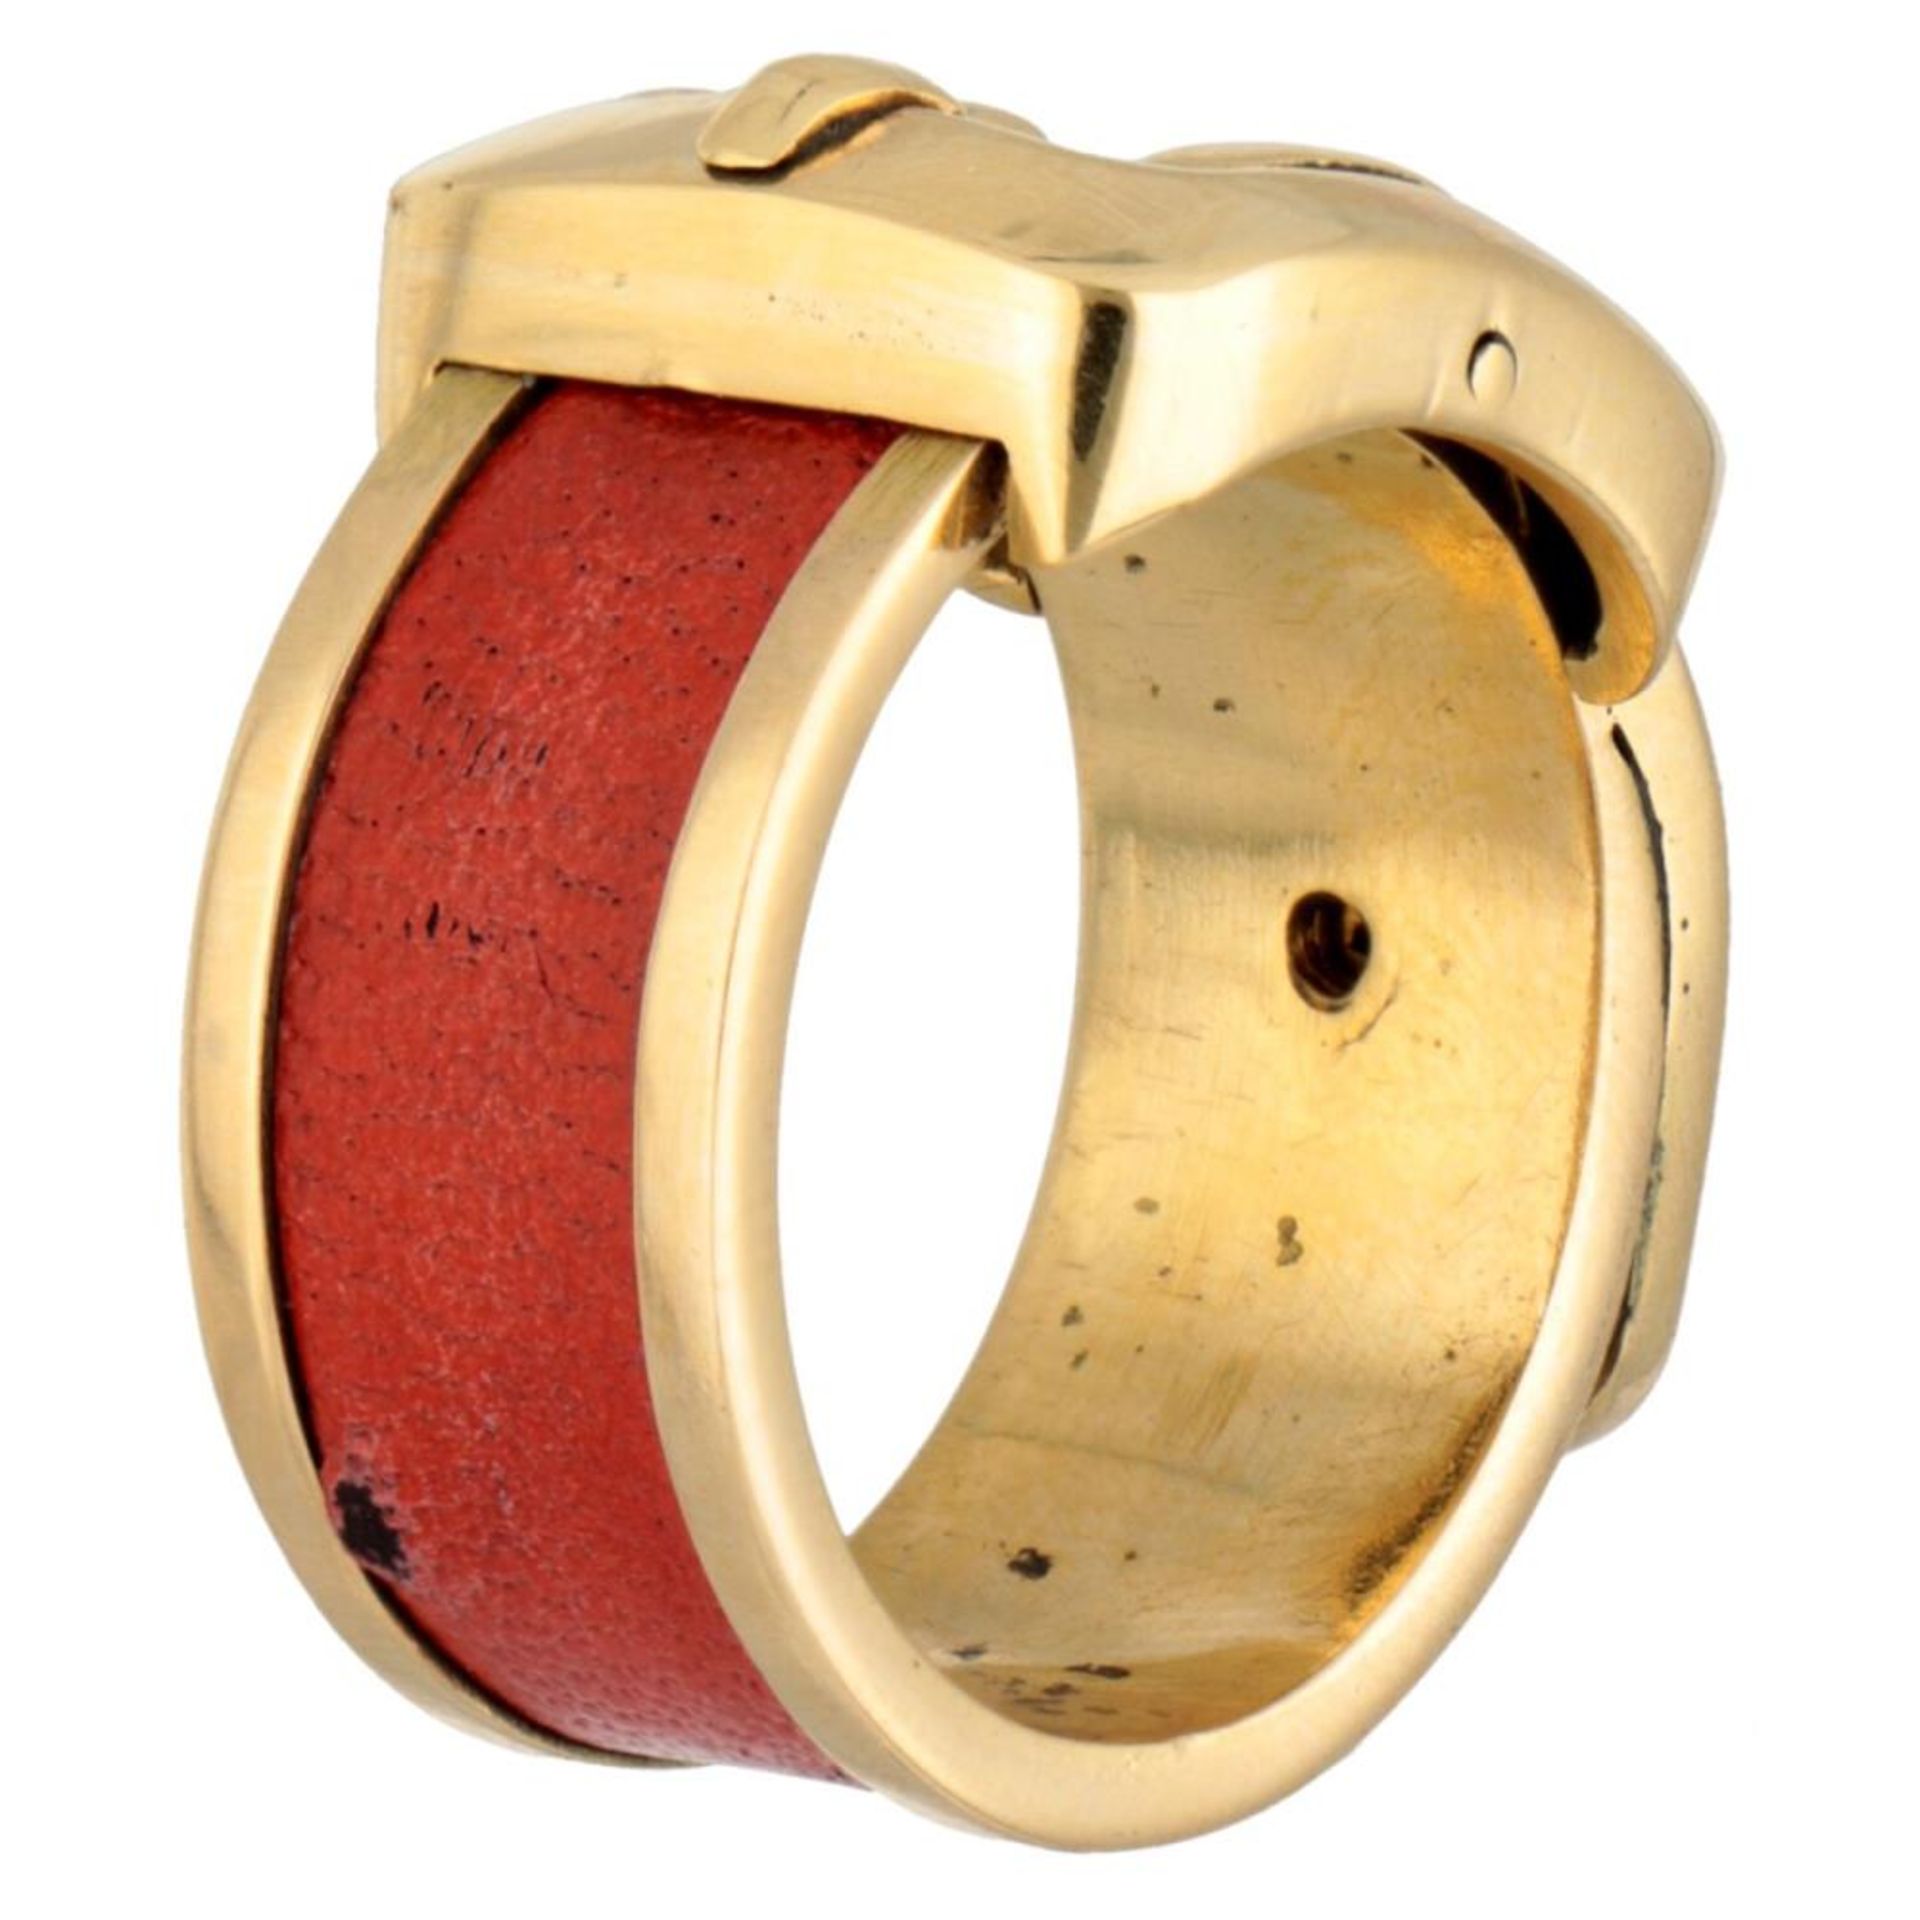 Vintage 18K. yellow gold buckle ring with red leather inlay. - Image 2 of 2